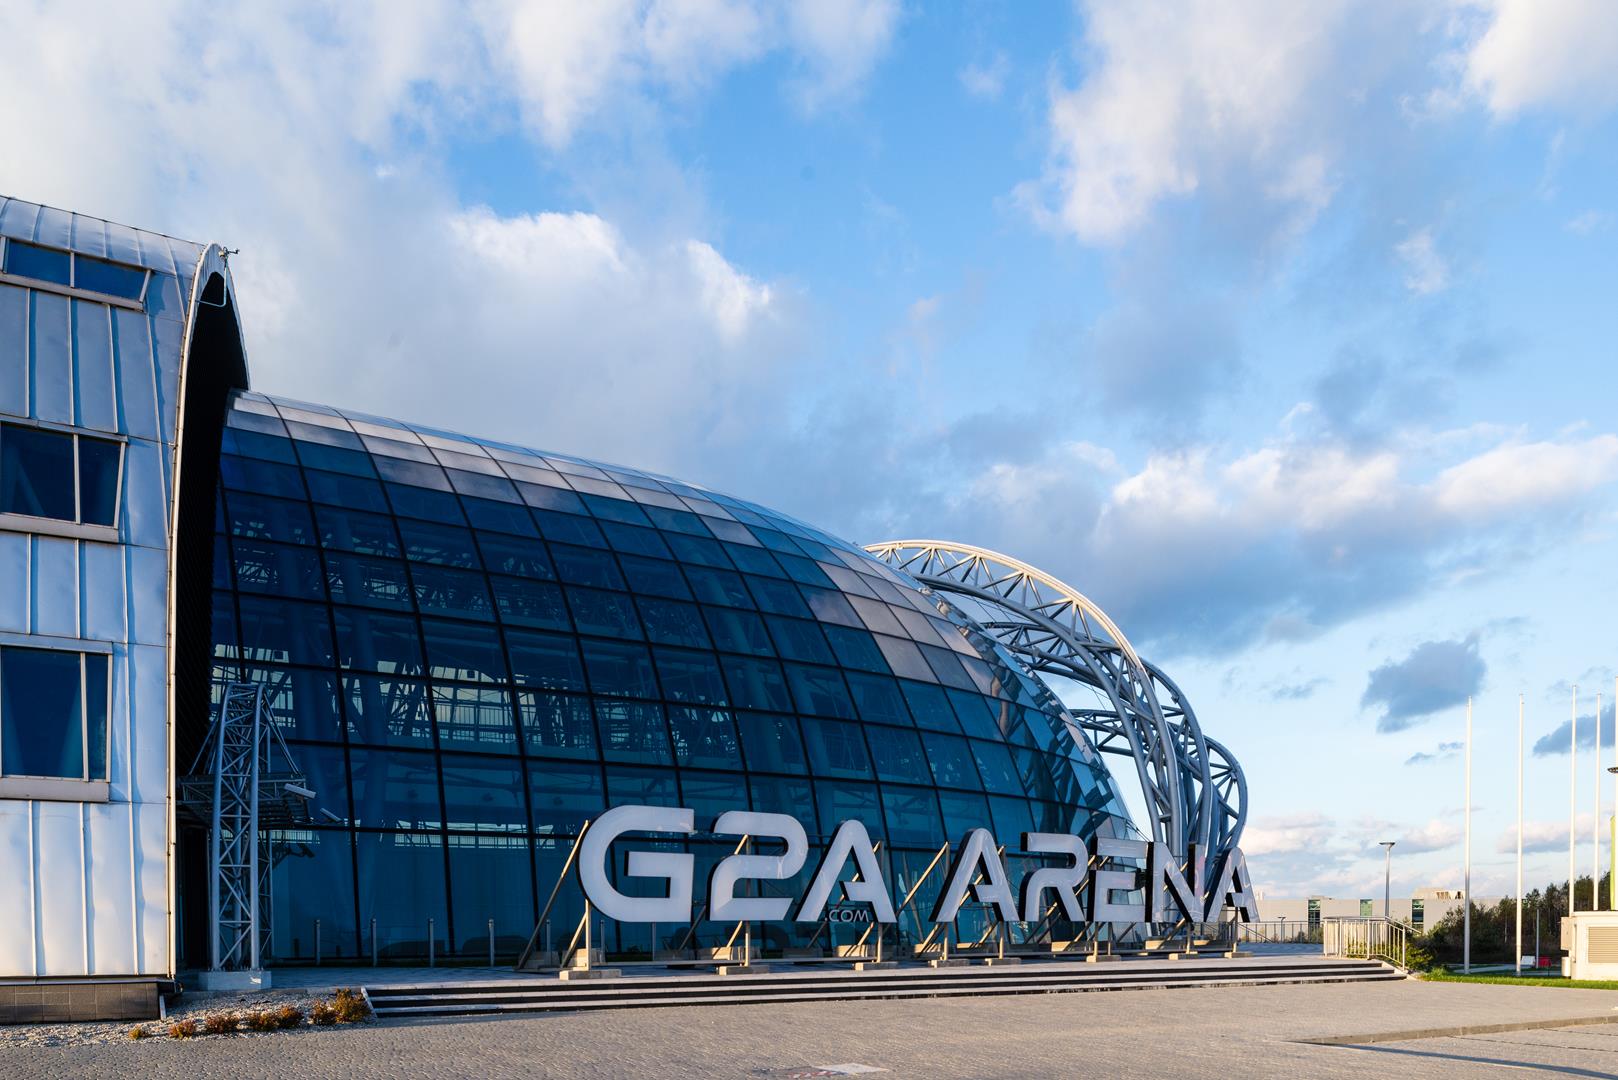 G2A ARENA